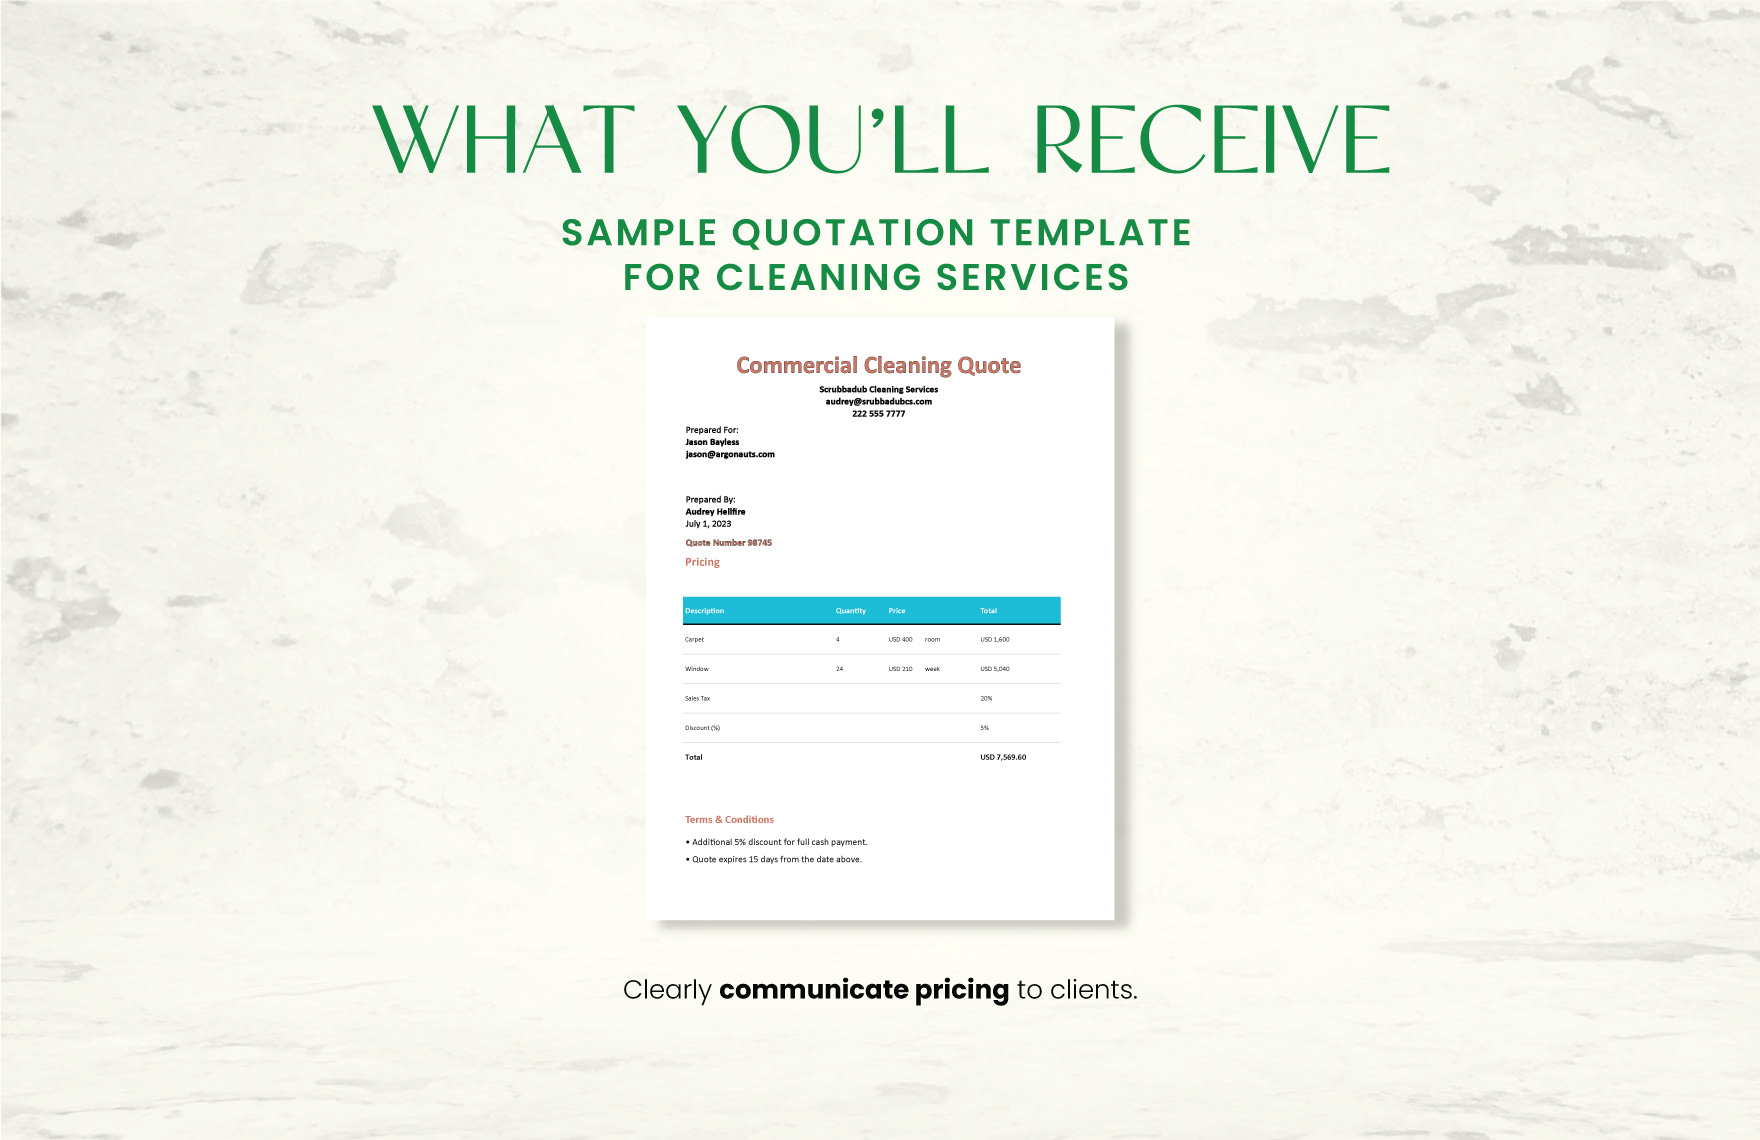 Sample Quotation Template For Cleaning Services